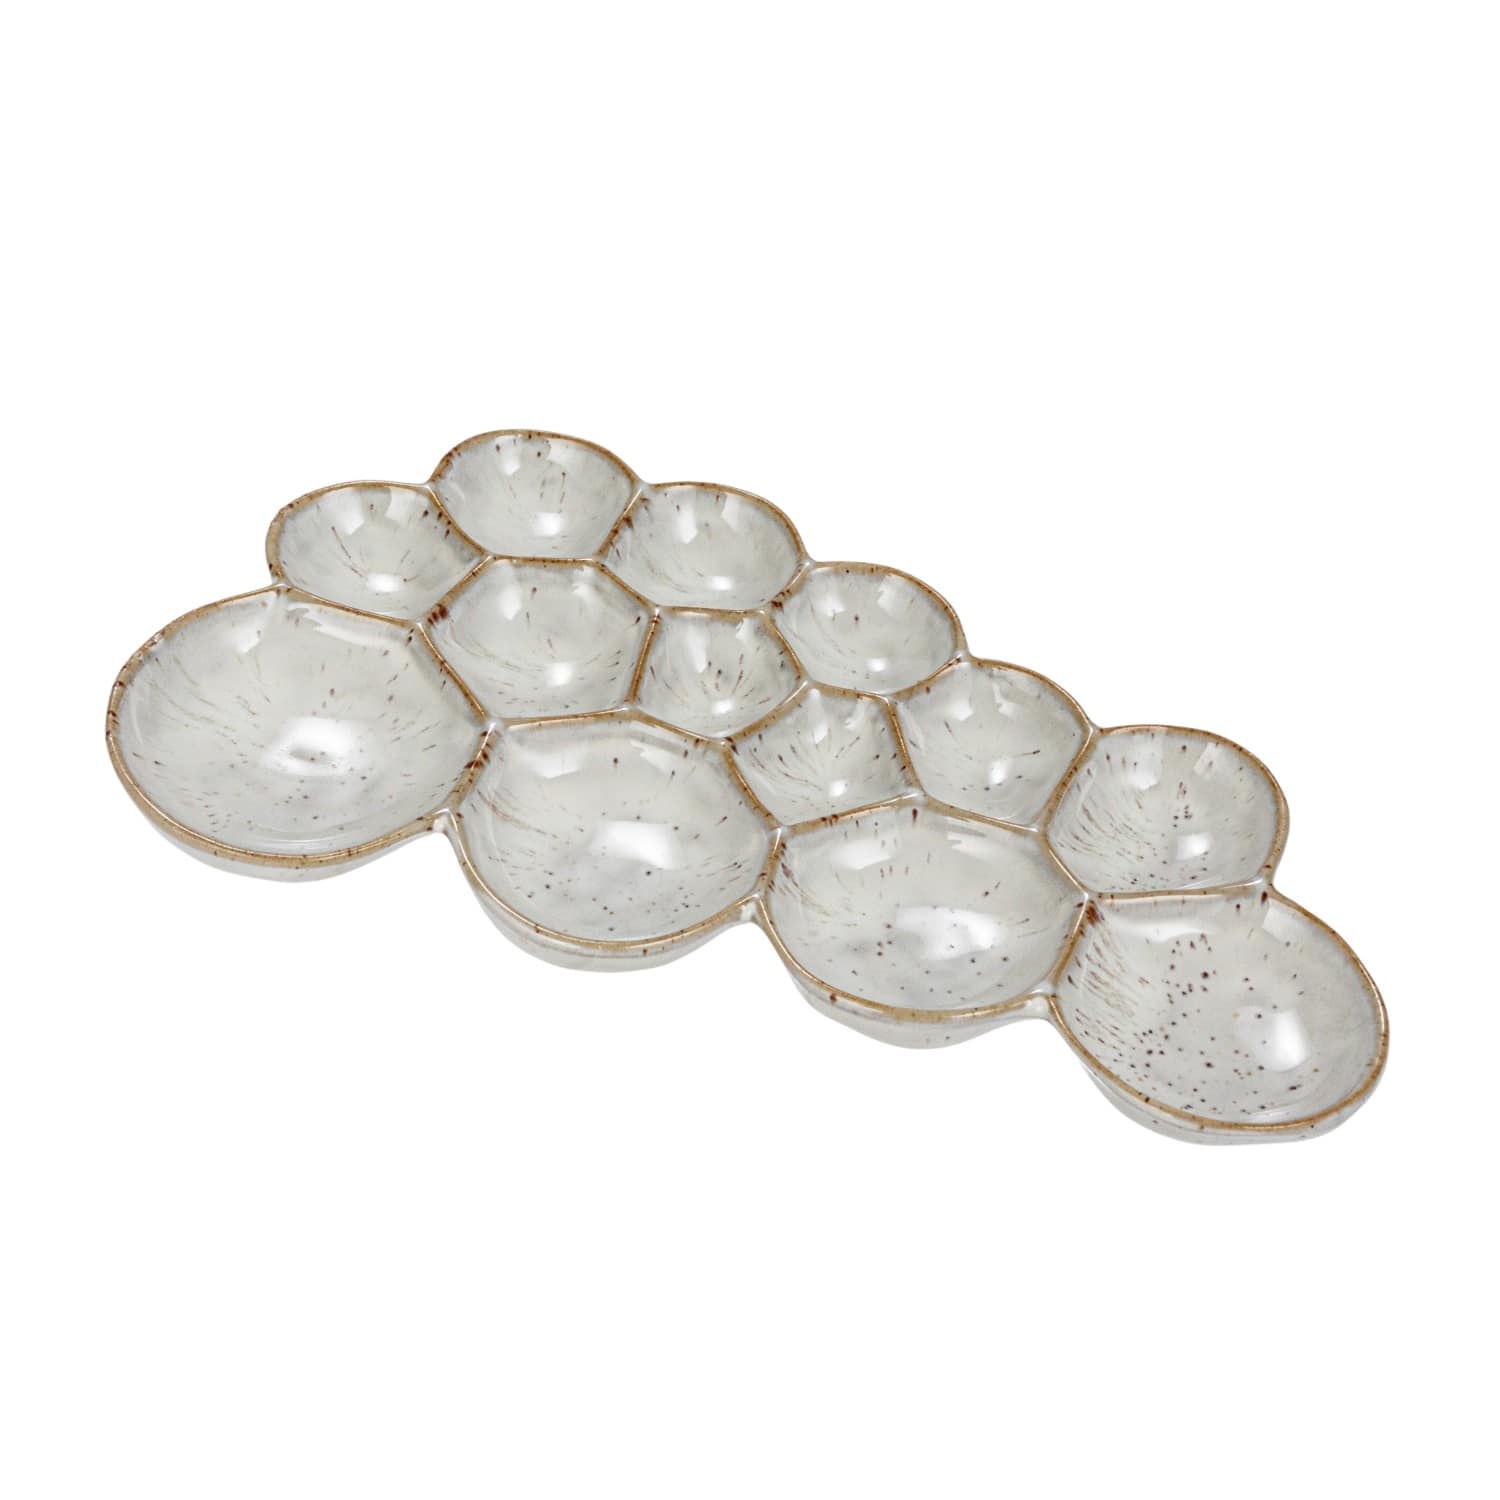 White Speckled 13-Section Stoneware Dish